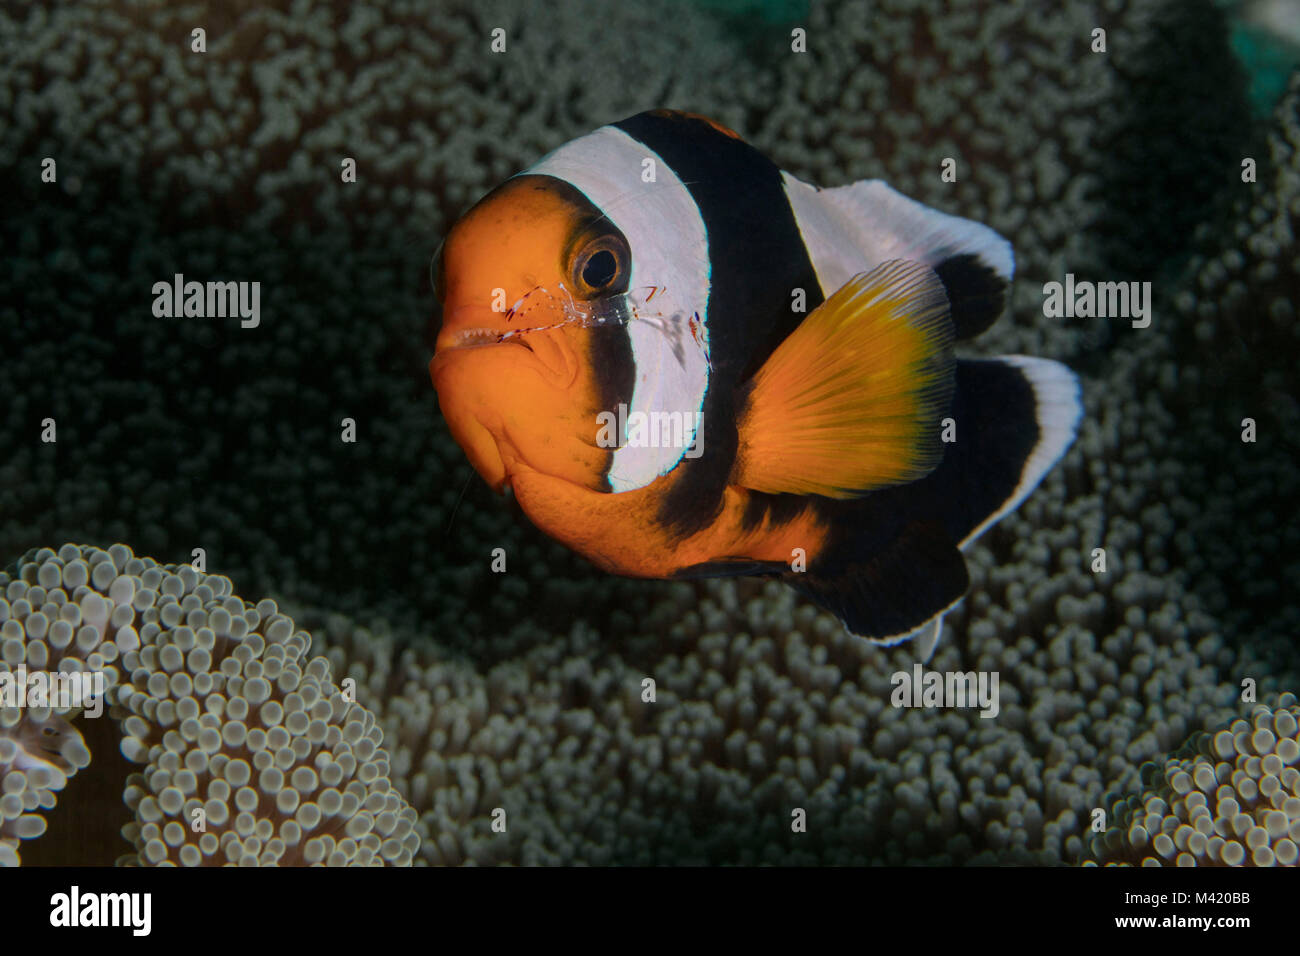 Little buddy. Anemonefish and shrimp (Ancylomenes holthuisi cleaning Amphiprion polymnus) near Panglao Island, Philippines. Stock Photo